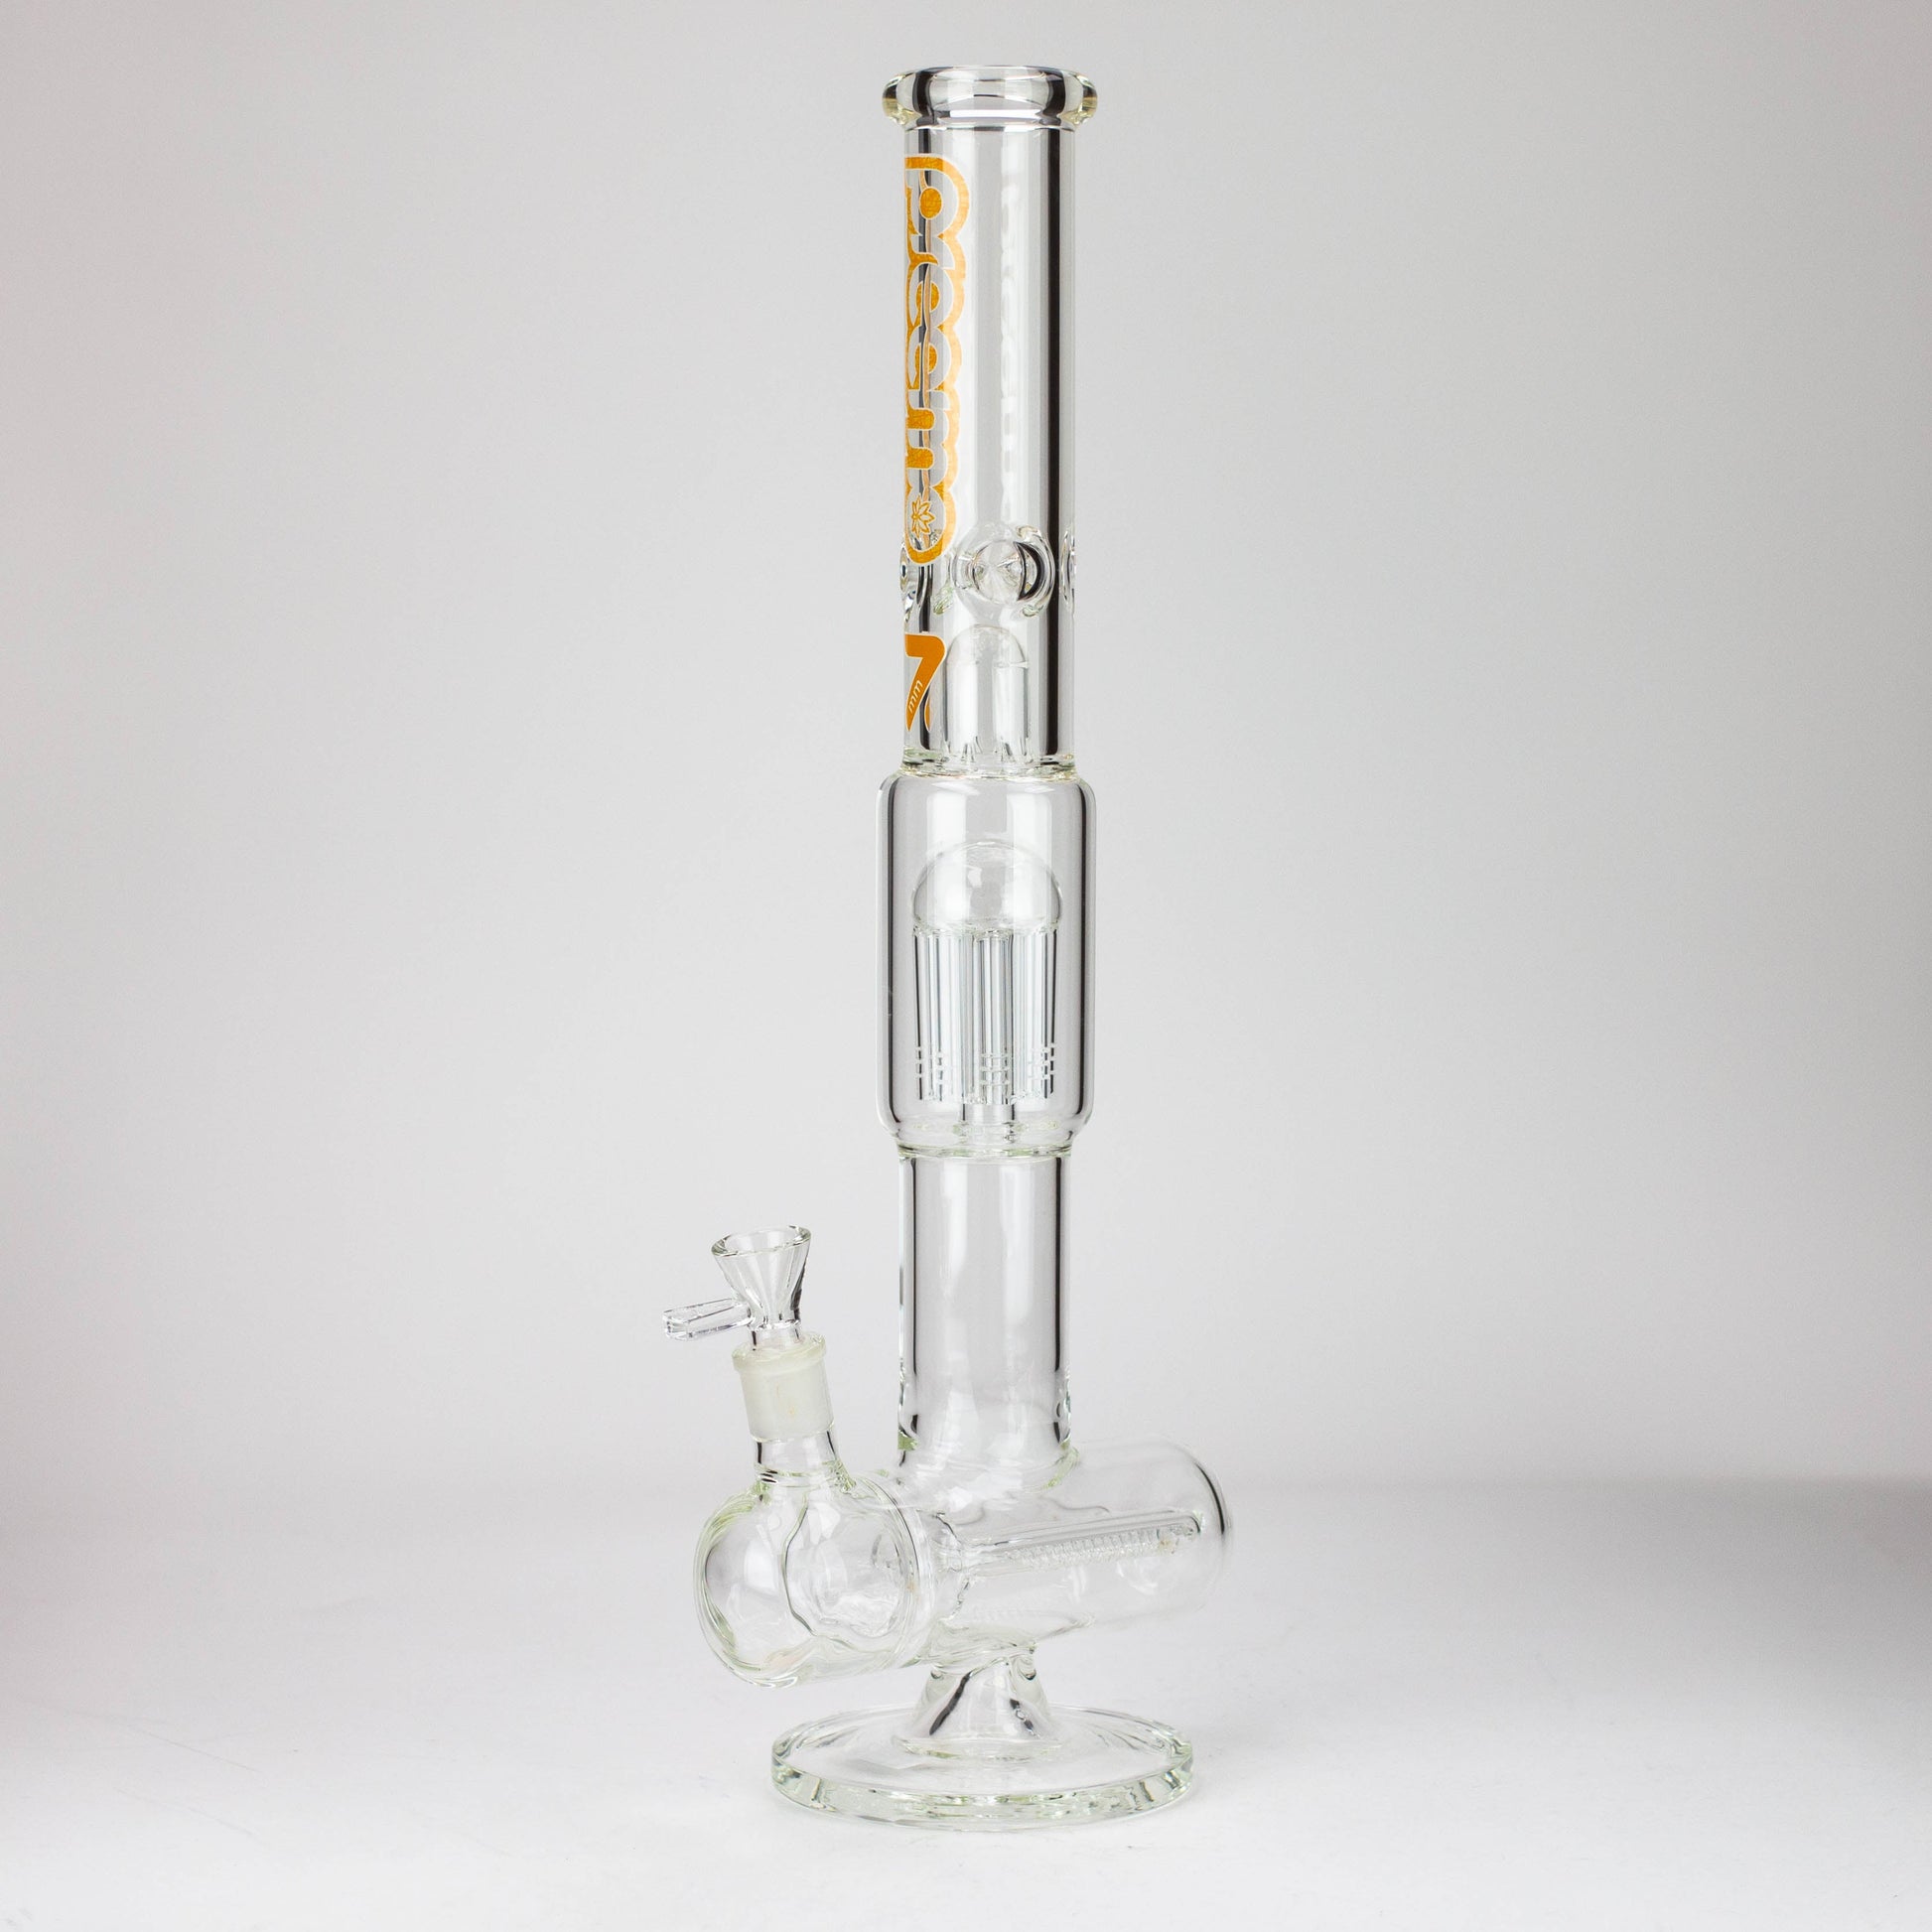 preemo - 20 inch Dome Over Triple Inline to Tree Perc [P015]_12